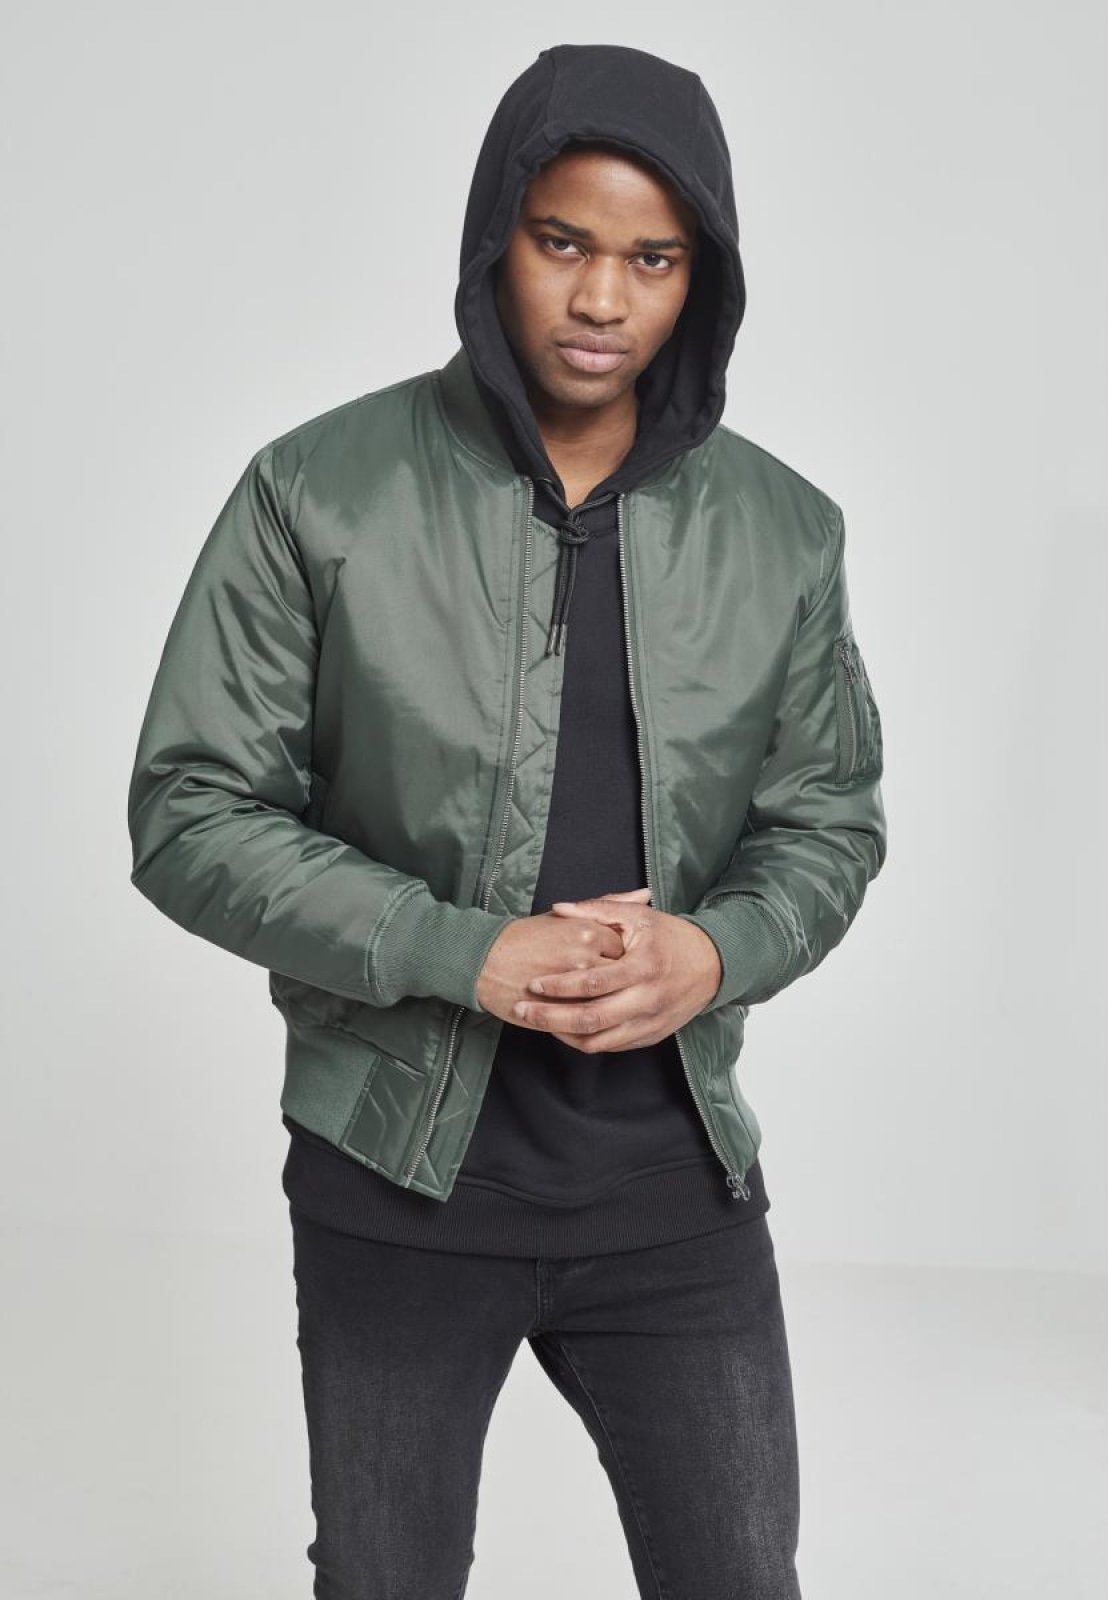 Street Wear Classic Bomber Jacket - BeExtra! Apparel & More